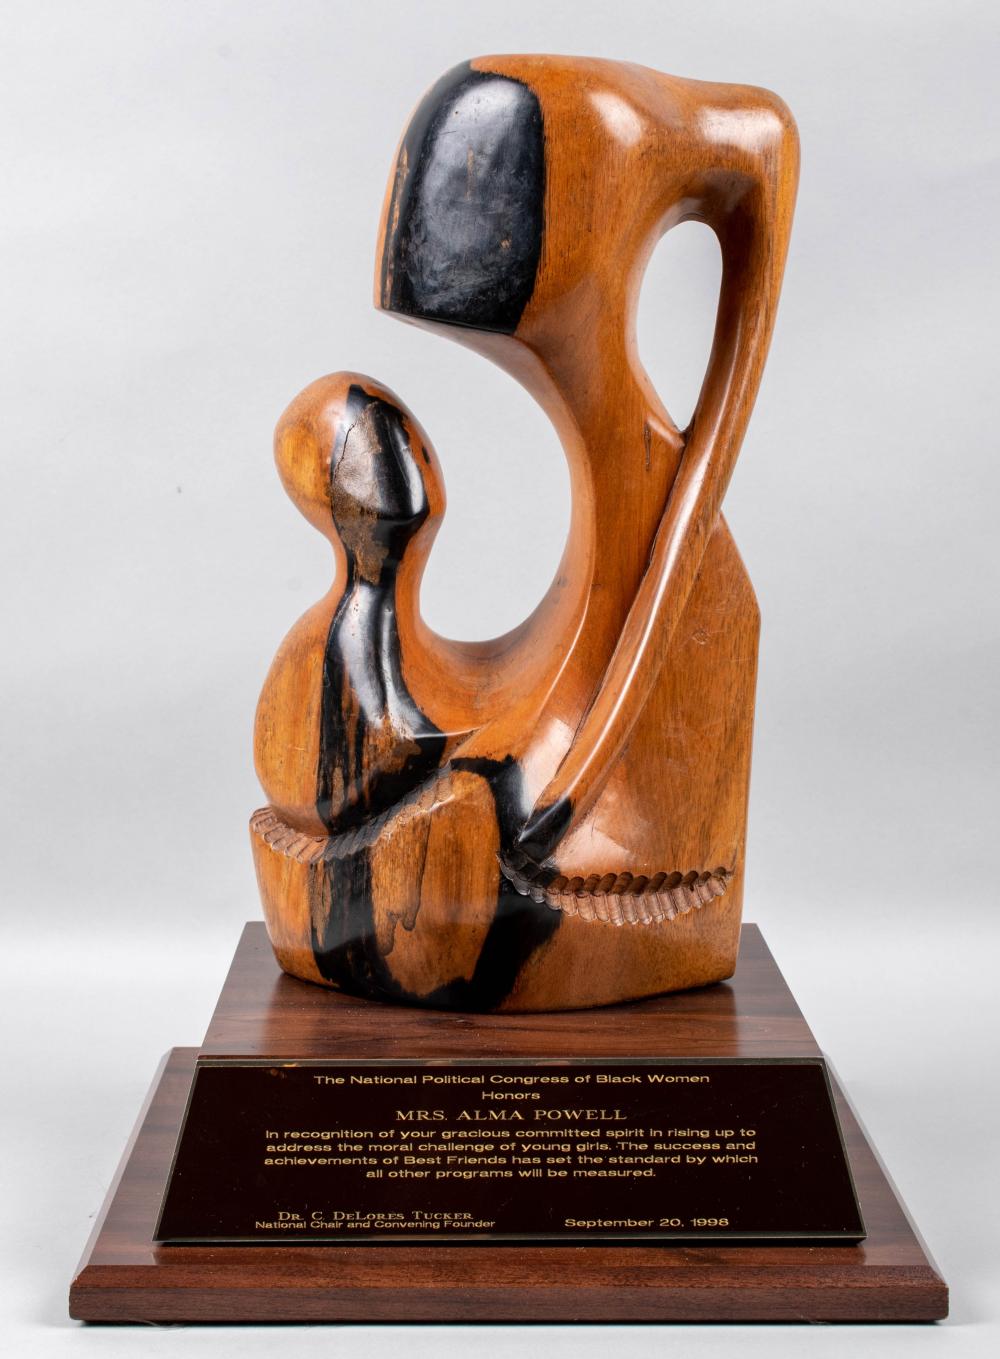 ABSTRACT WOOD SCULPTURE HONORING